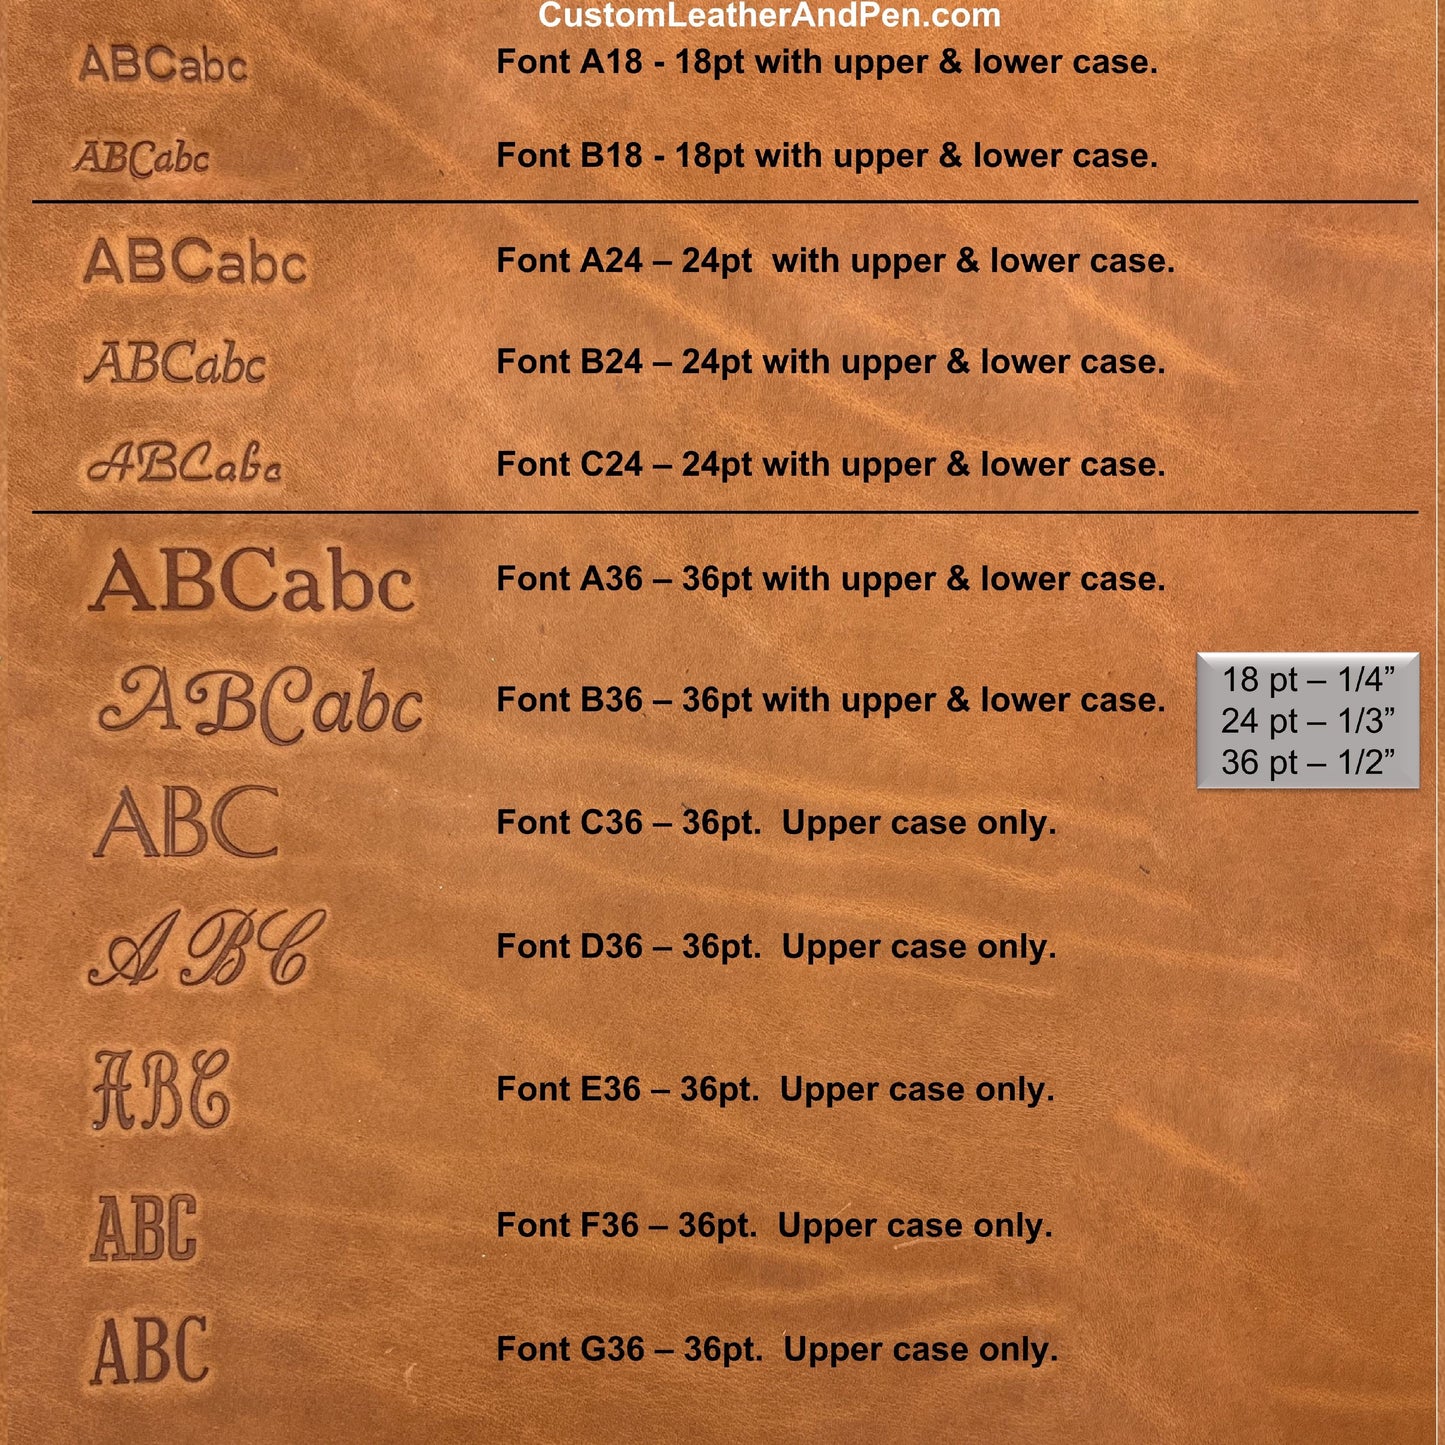 Heat Stamp Font Options for Custom Leather and Pen Leather Shop in Houston, TX